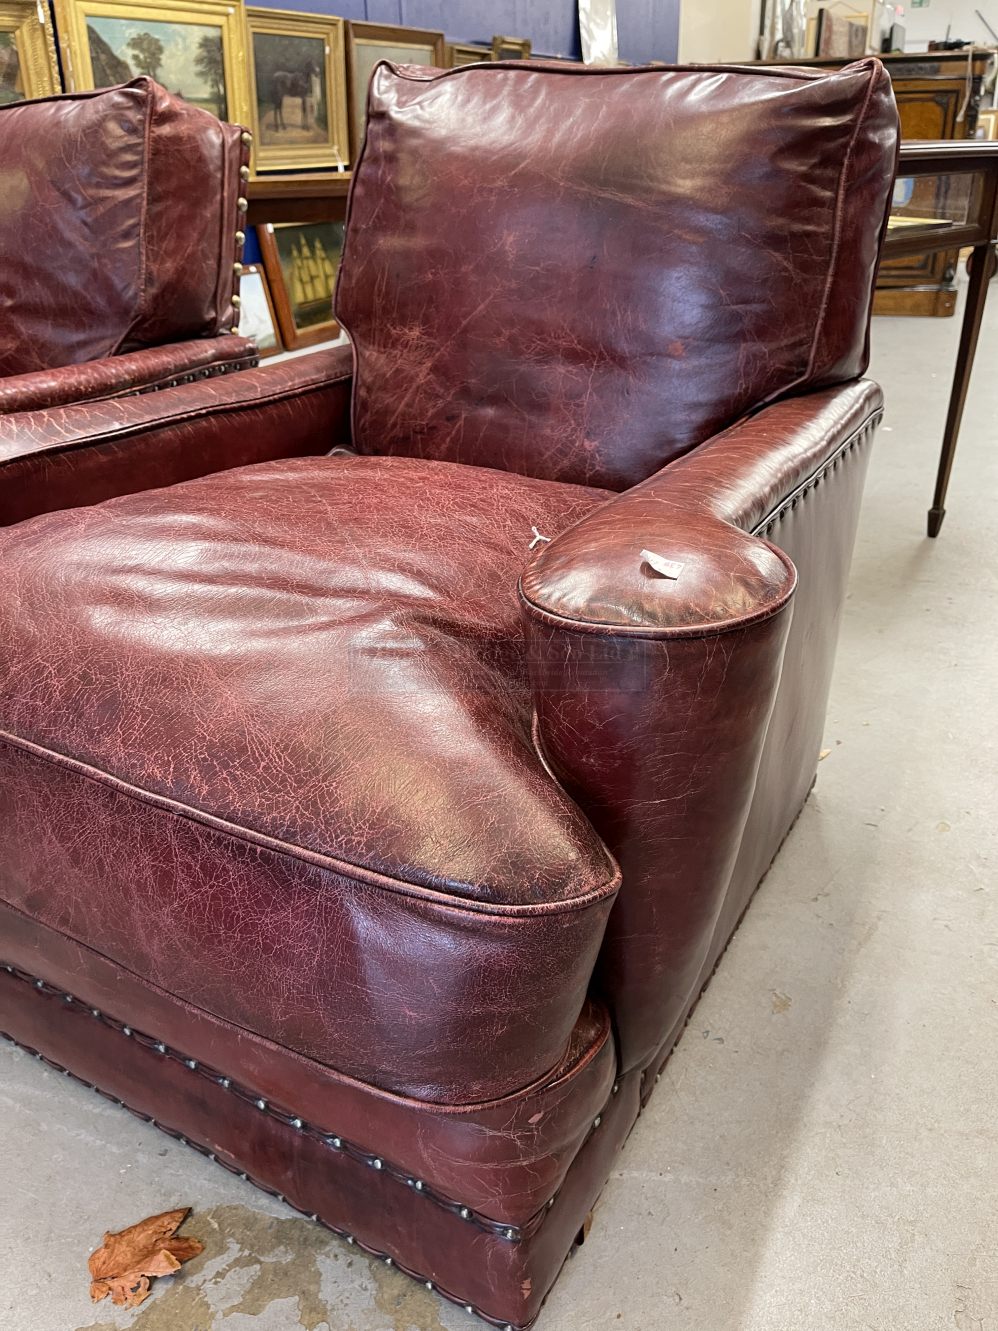 Pre-war red leather club chairs in the style of Howard & Co. Re upholstered in traditional wine - Image 2 of 4